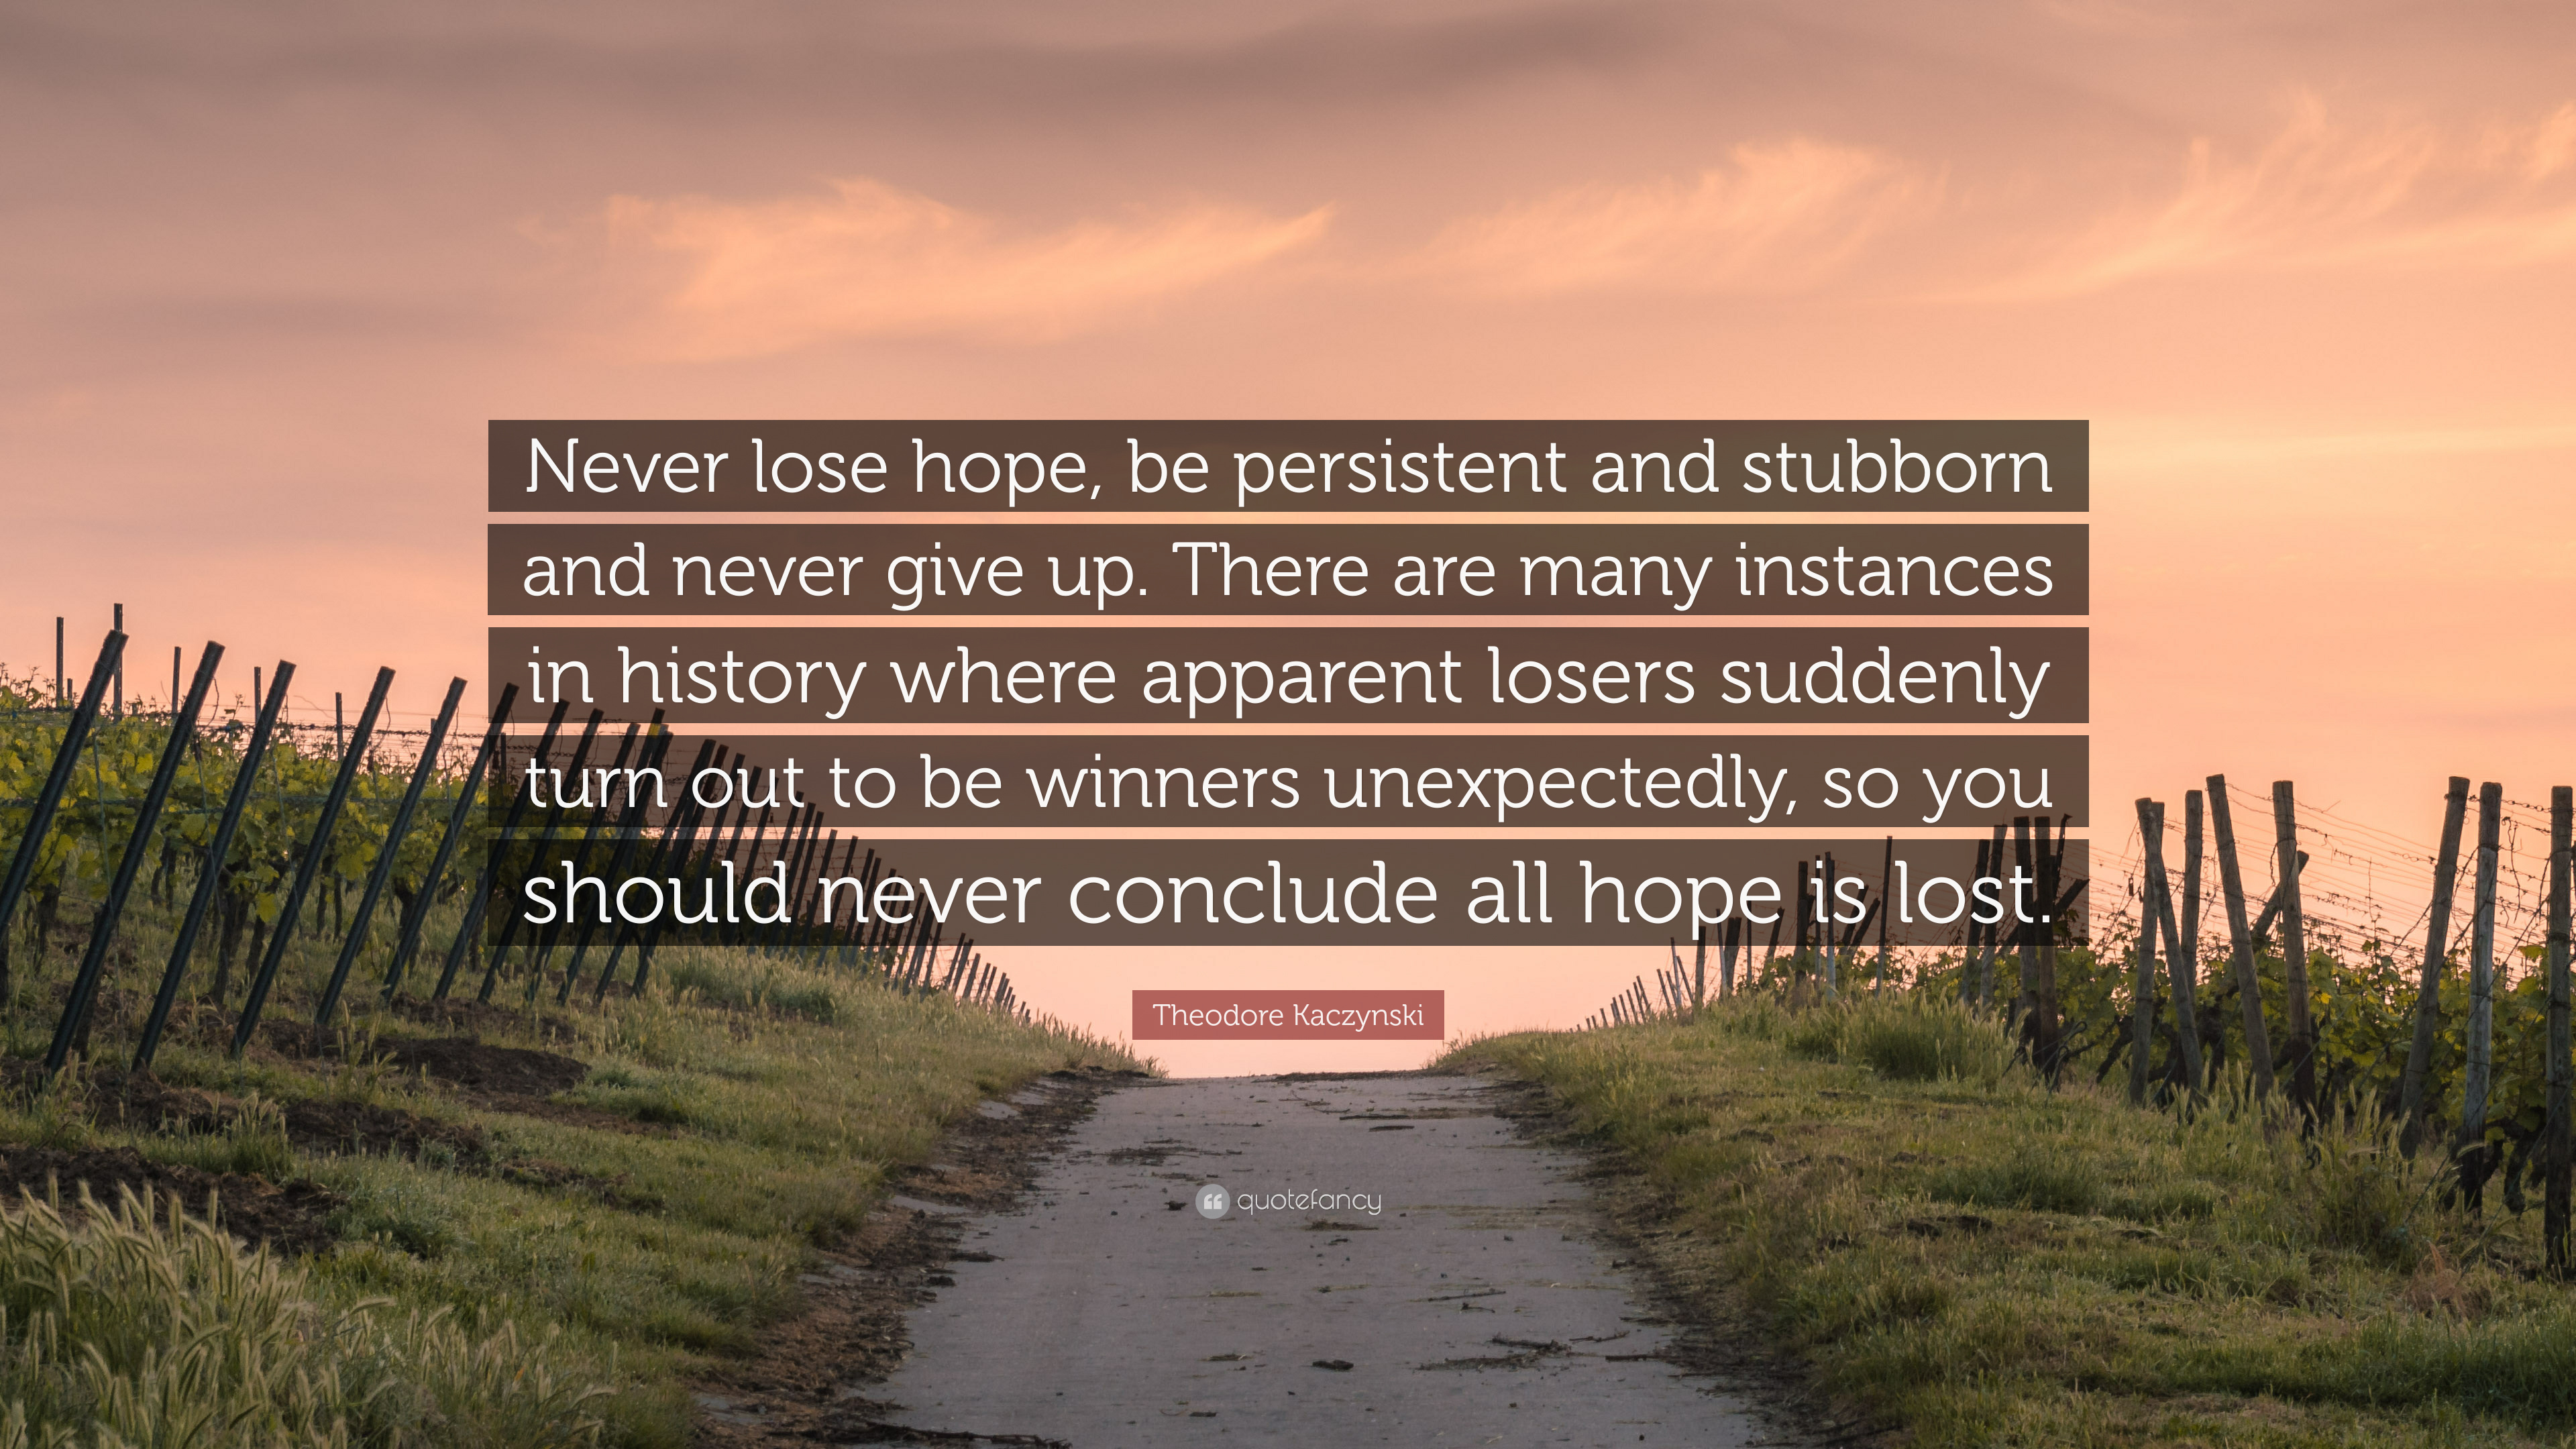 4940964-Theodore-Kaczynski-Quote-Never-lose-hope-be-persistent-and.jpeg